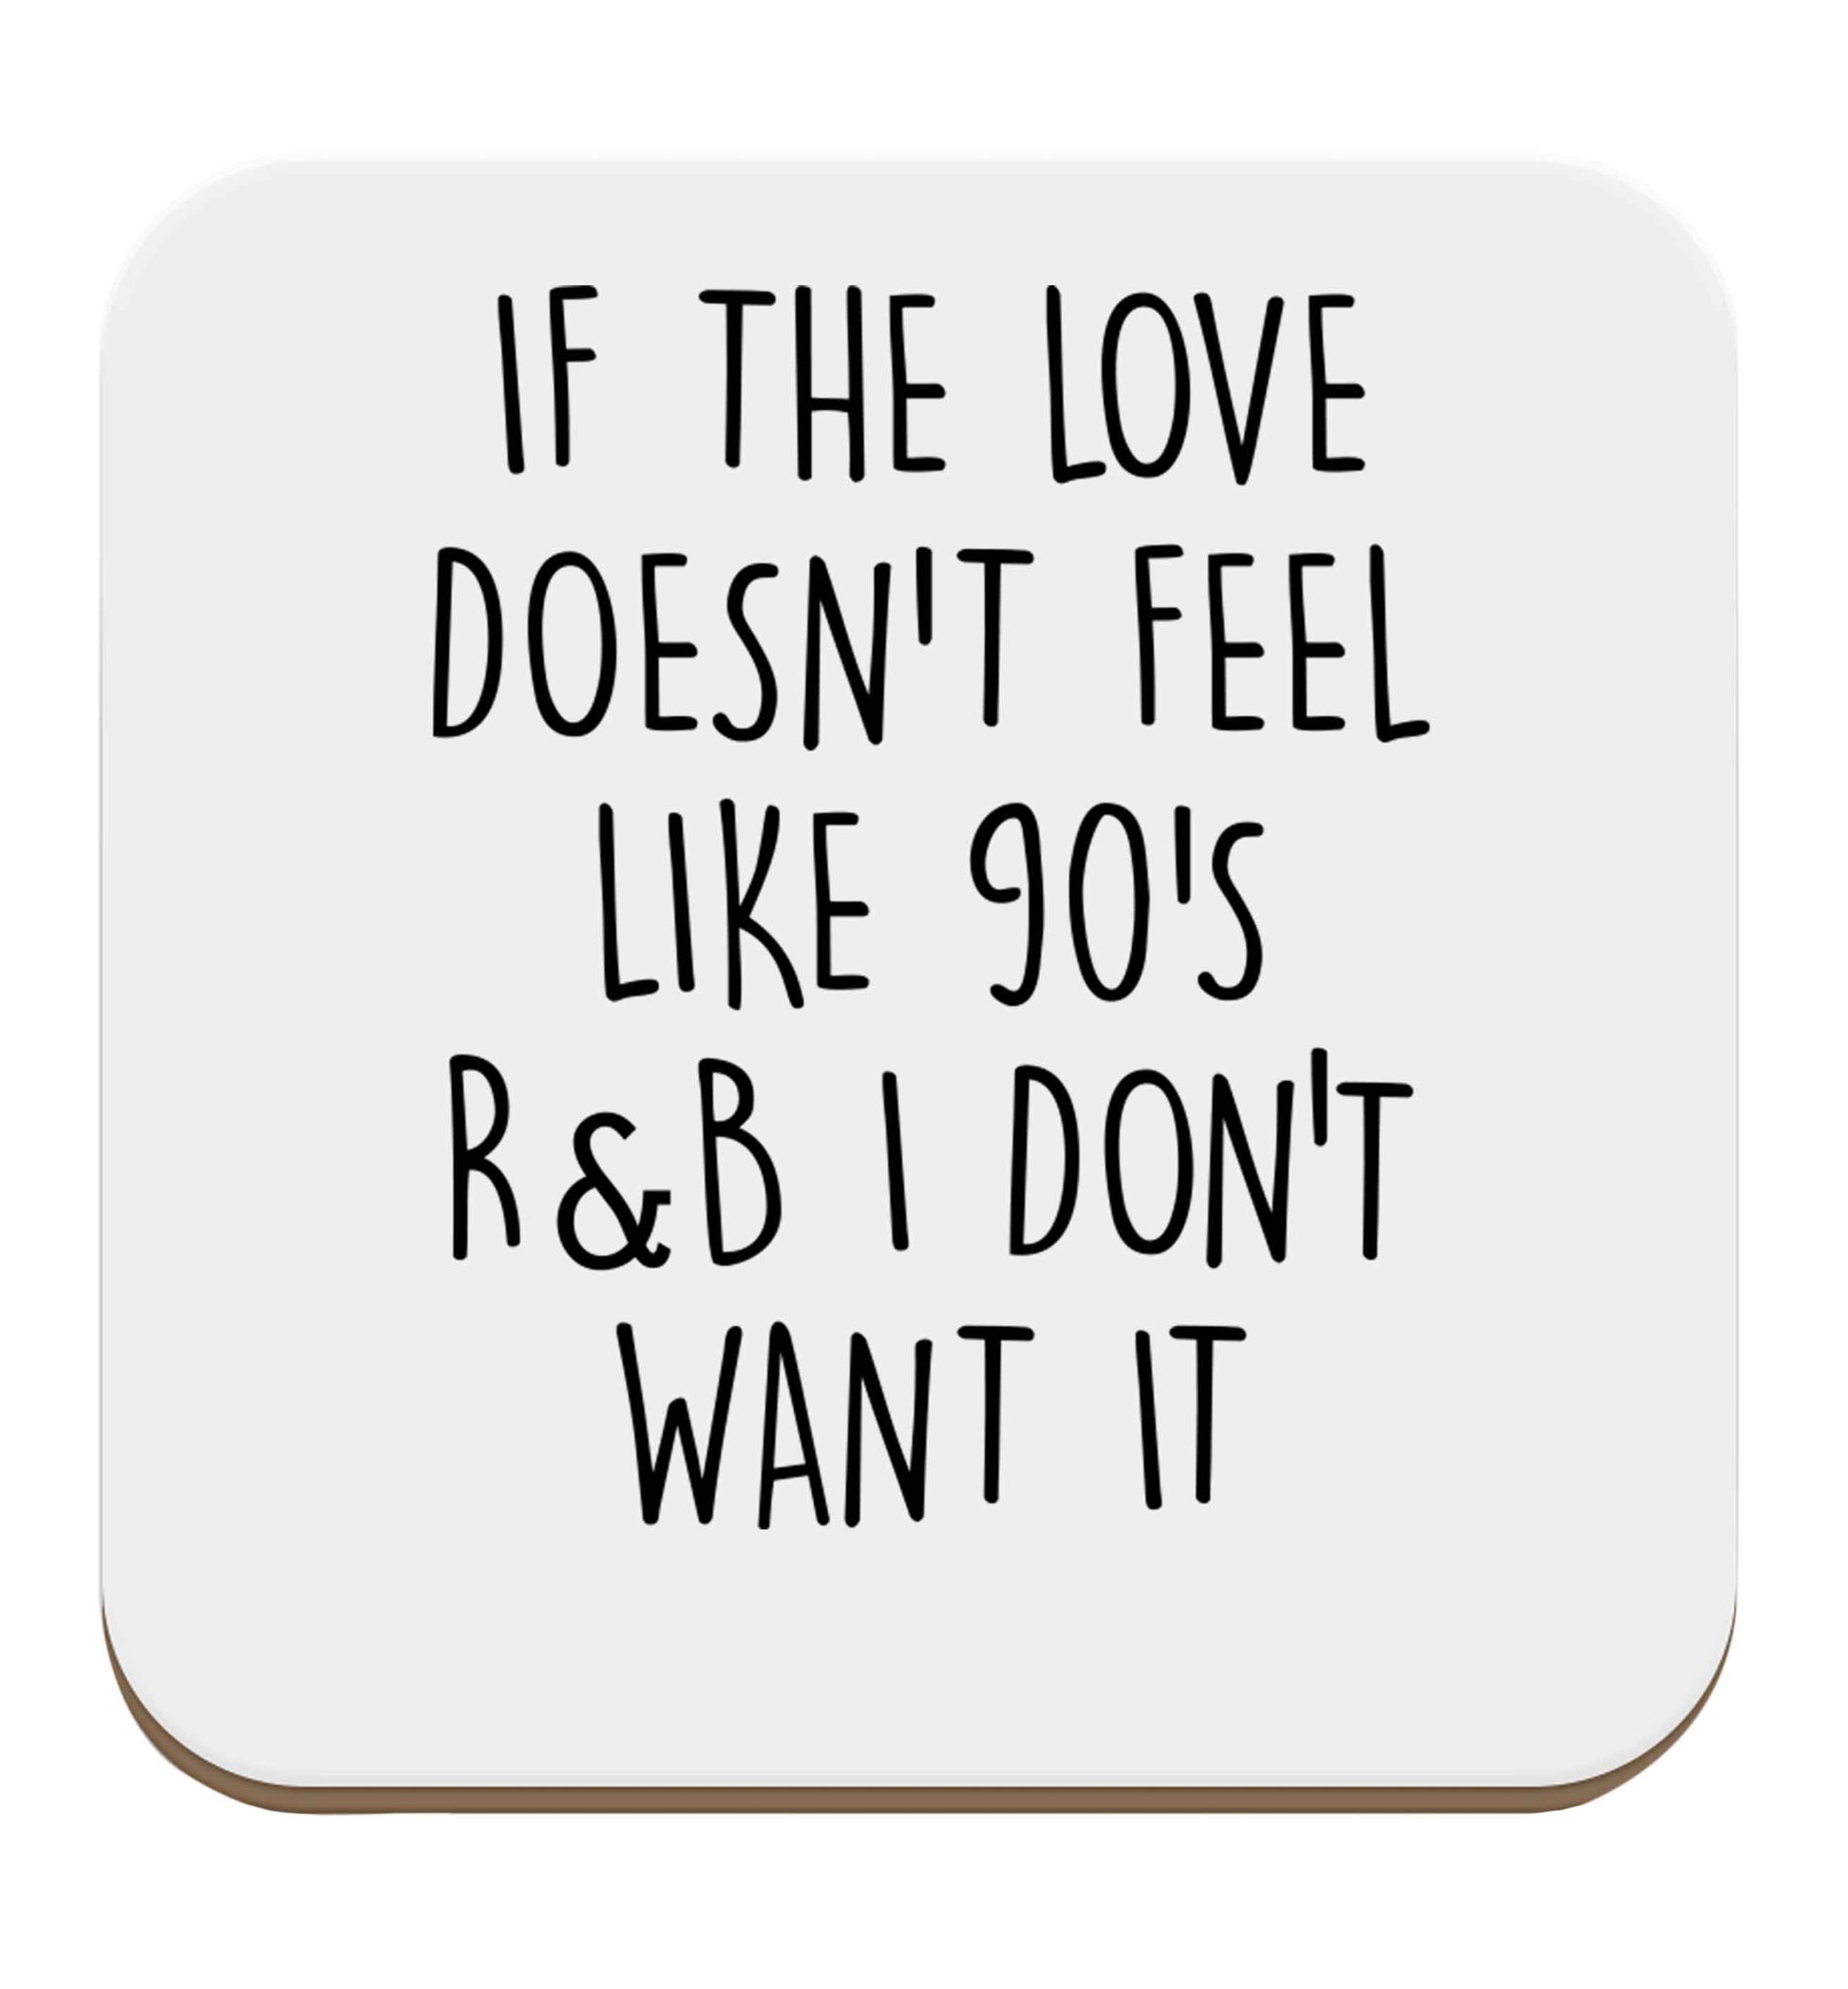 If the love doesn't feel like 90's r&b I don't want it set of four coasters